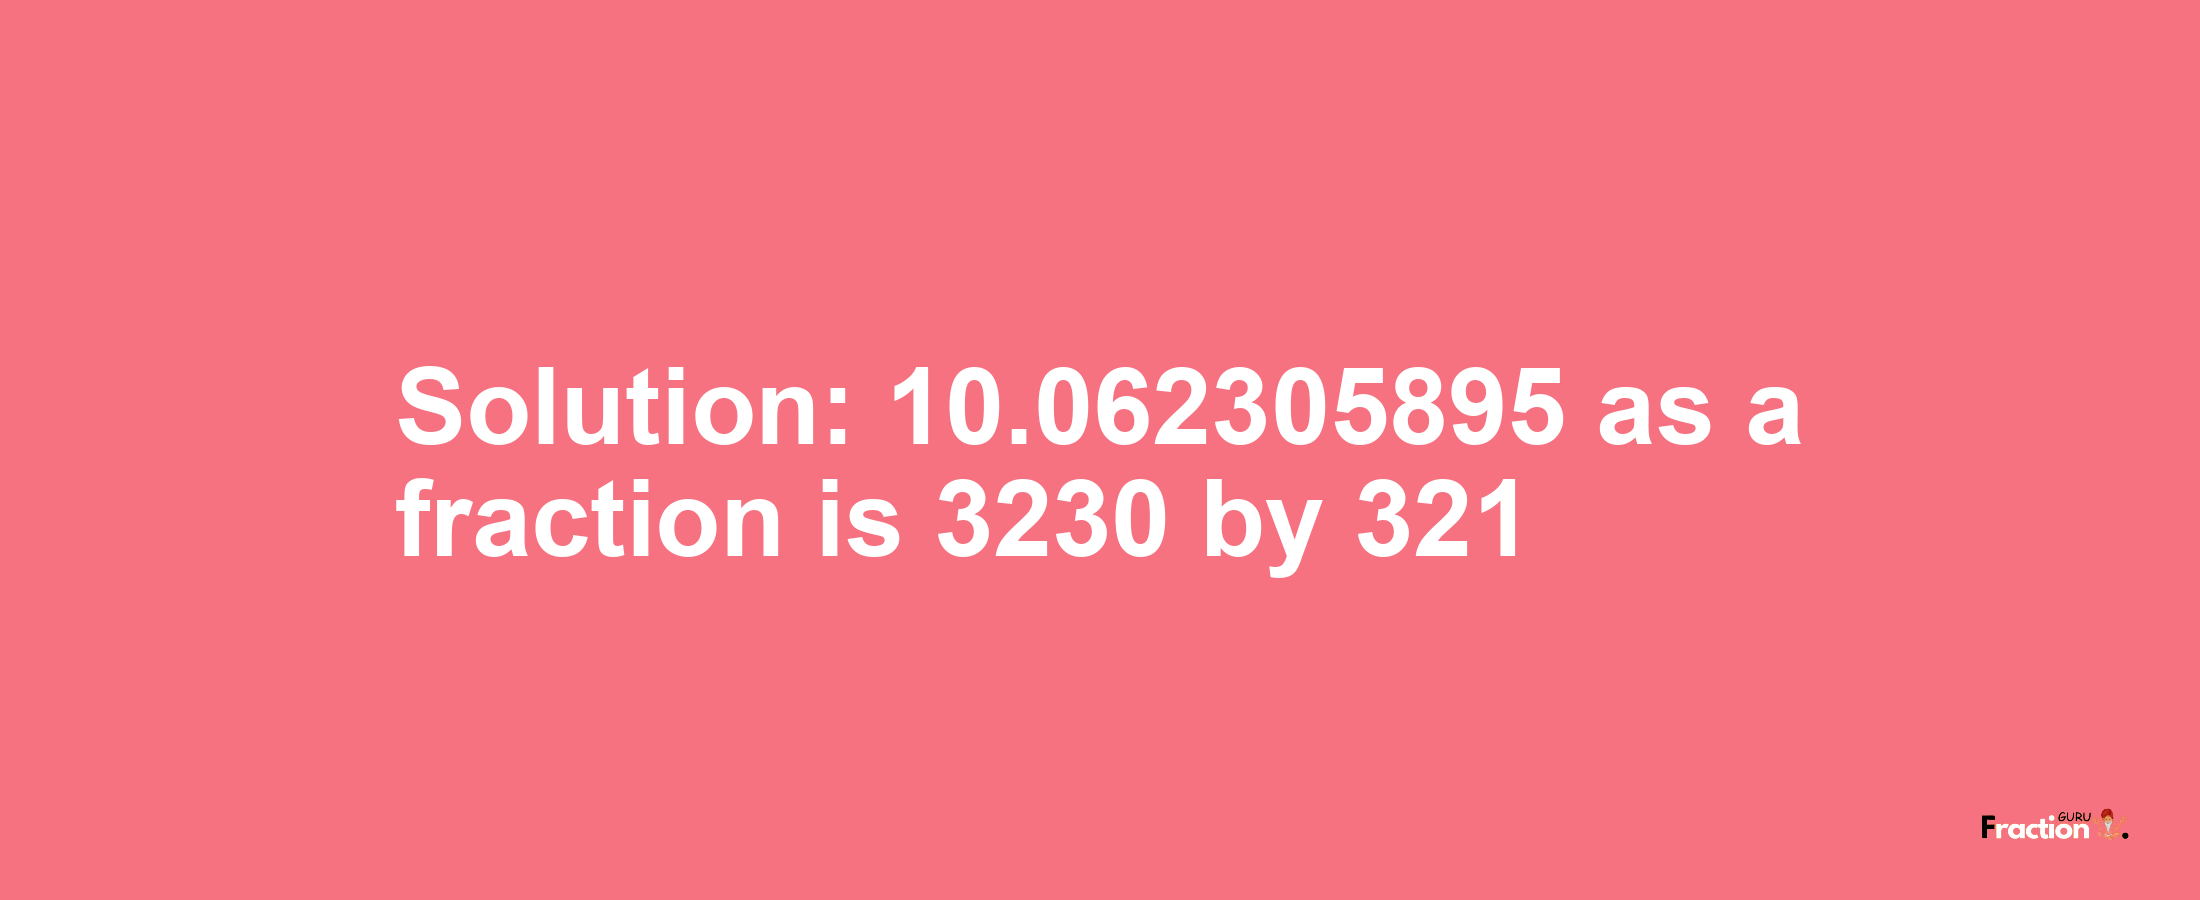 Solution:10.062305895 as a fraction is 3230/321